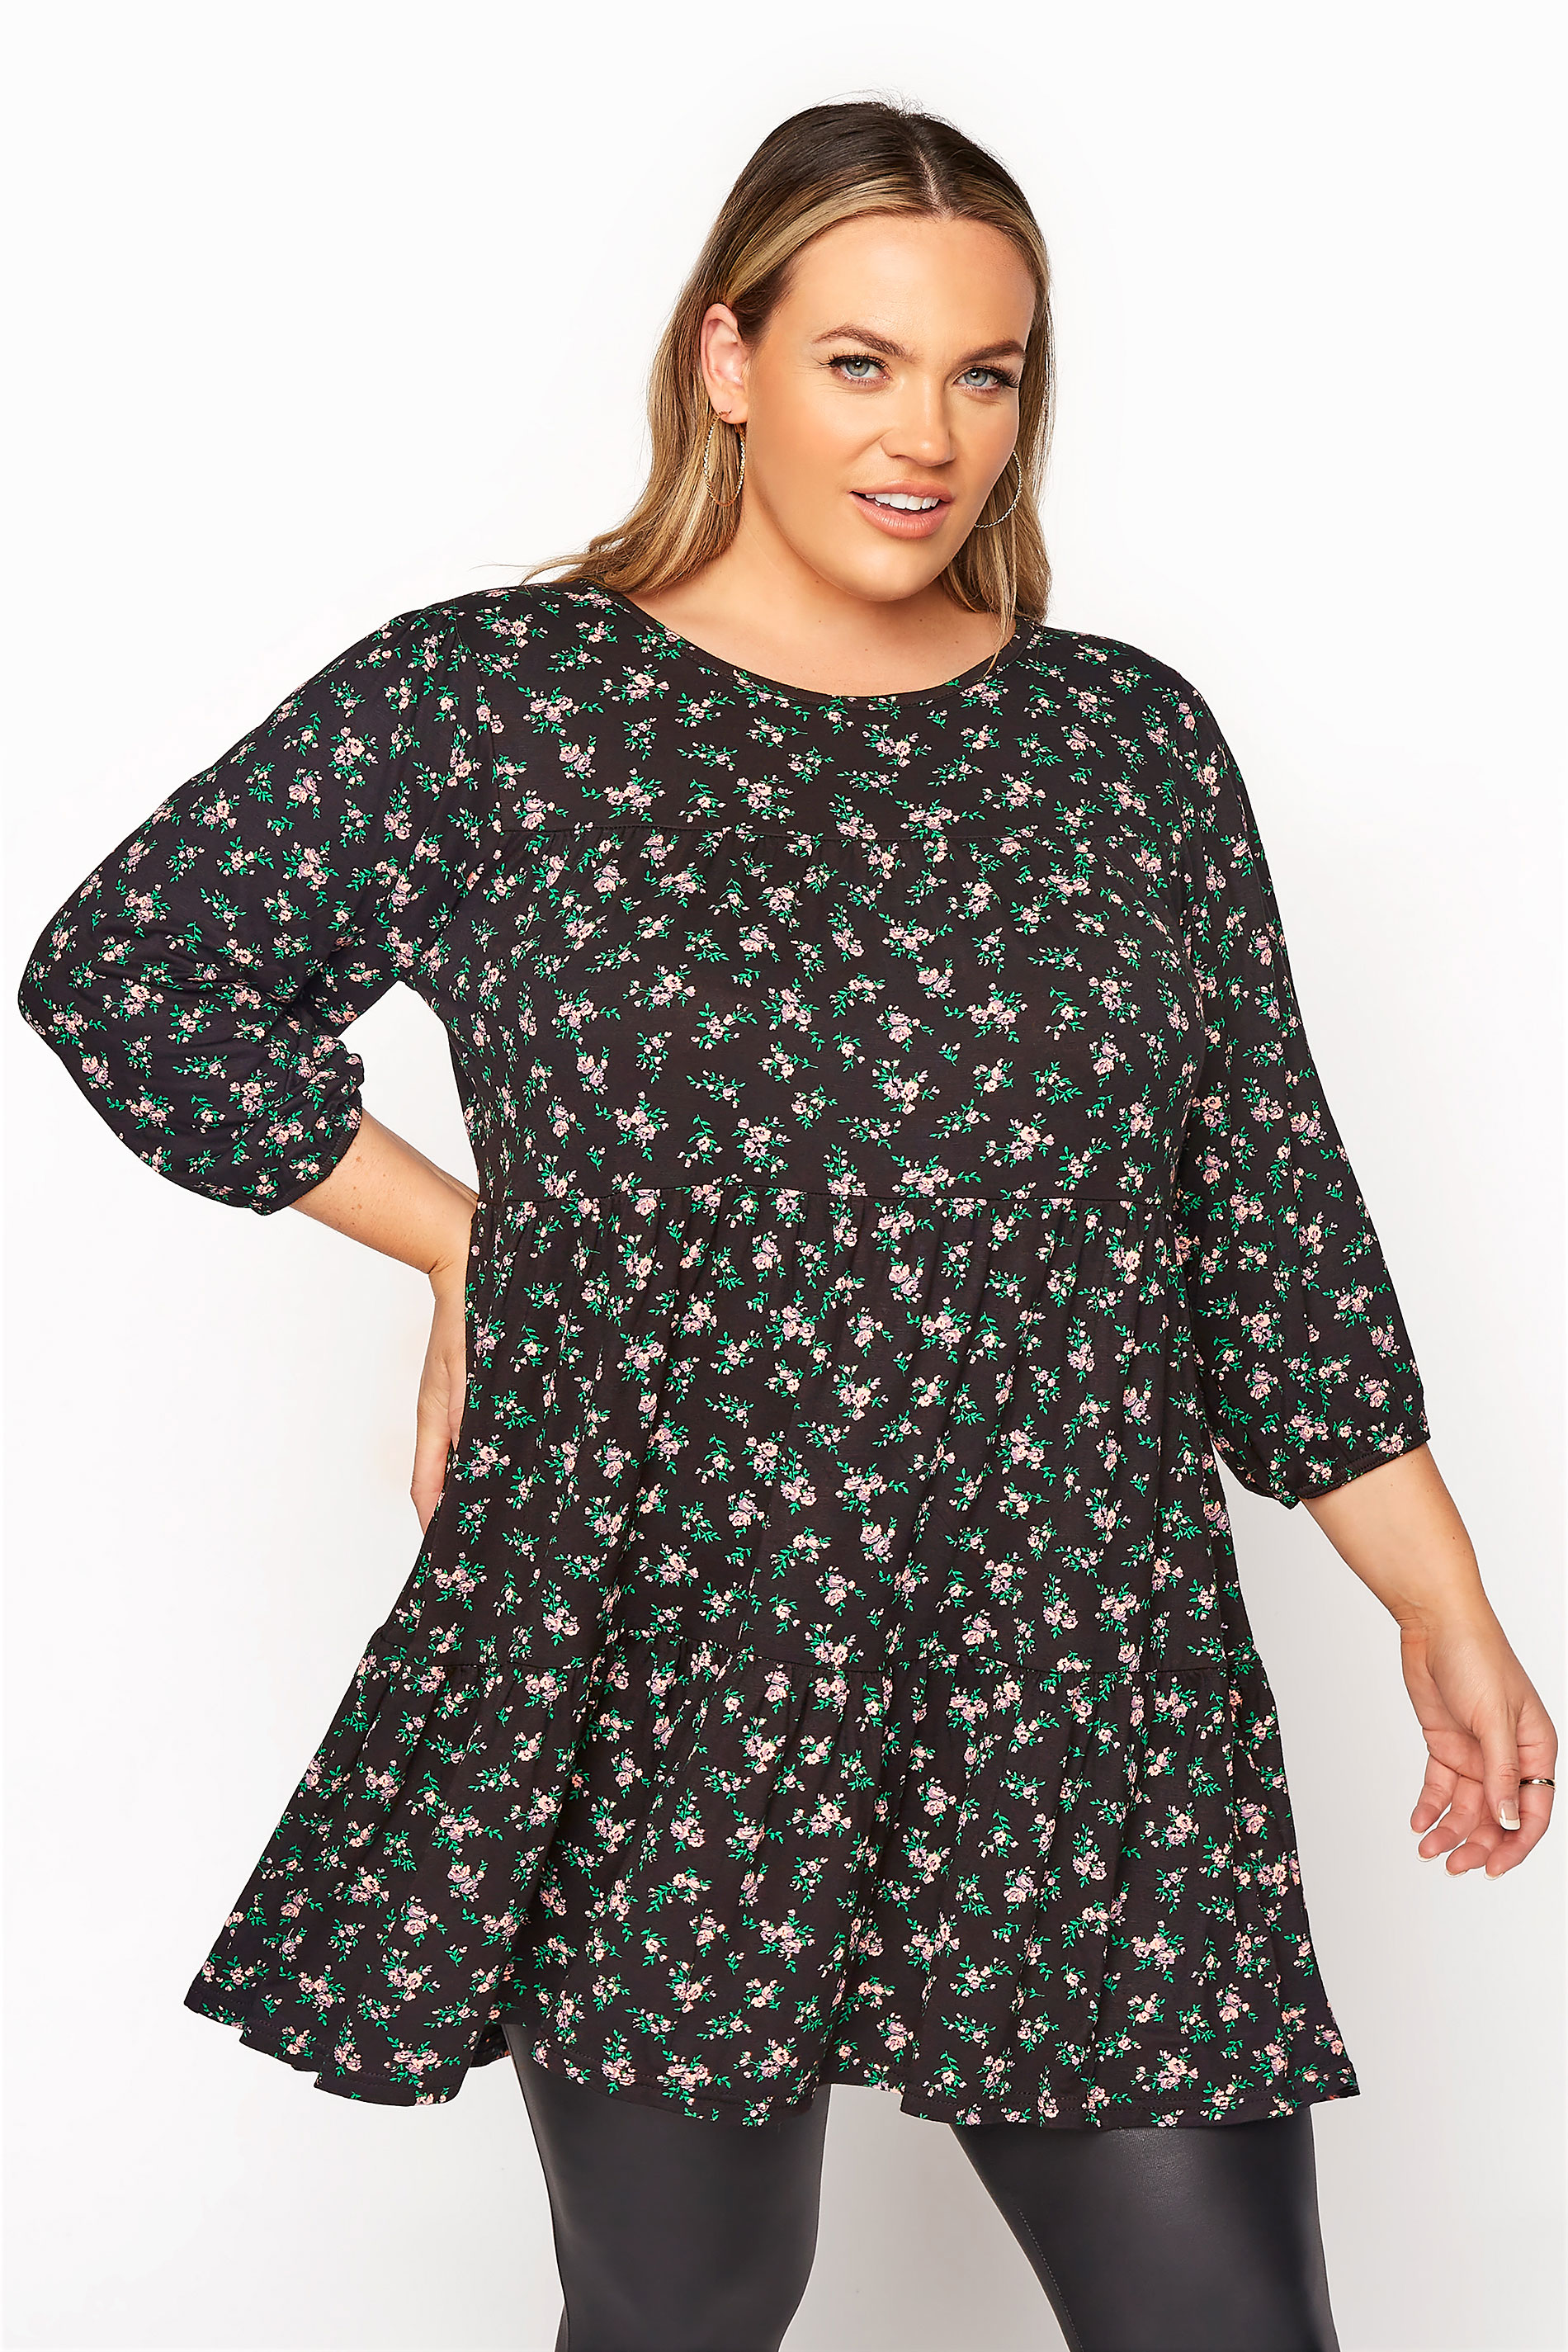 LIMITED COLLECTION Black Floral Print Smock Top_A.jpg